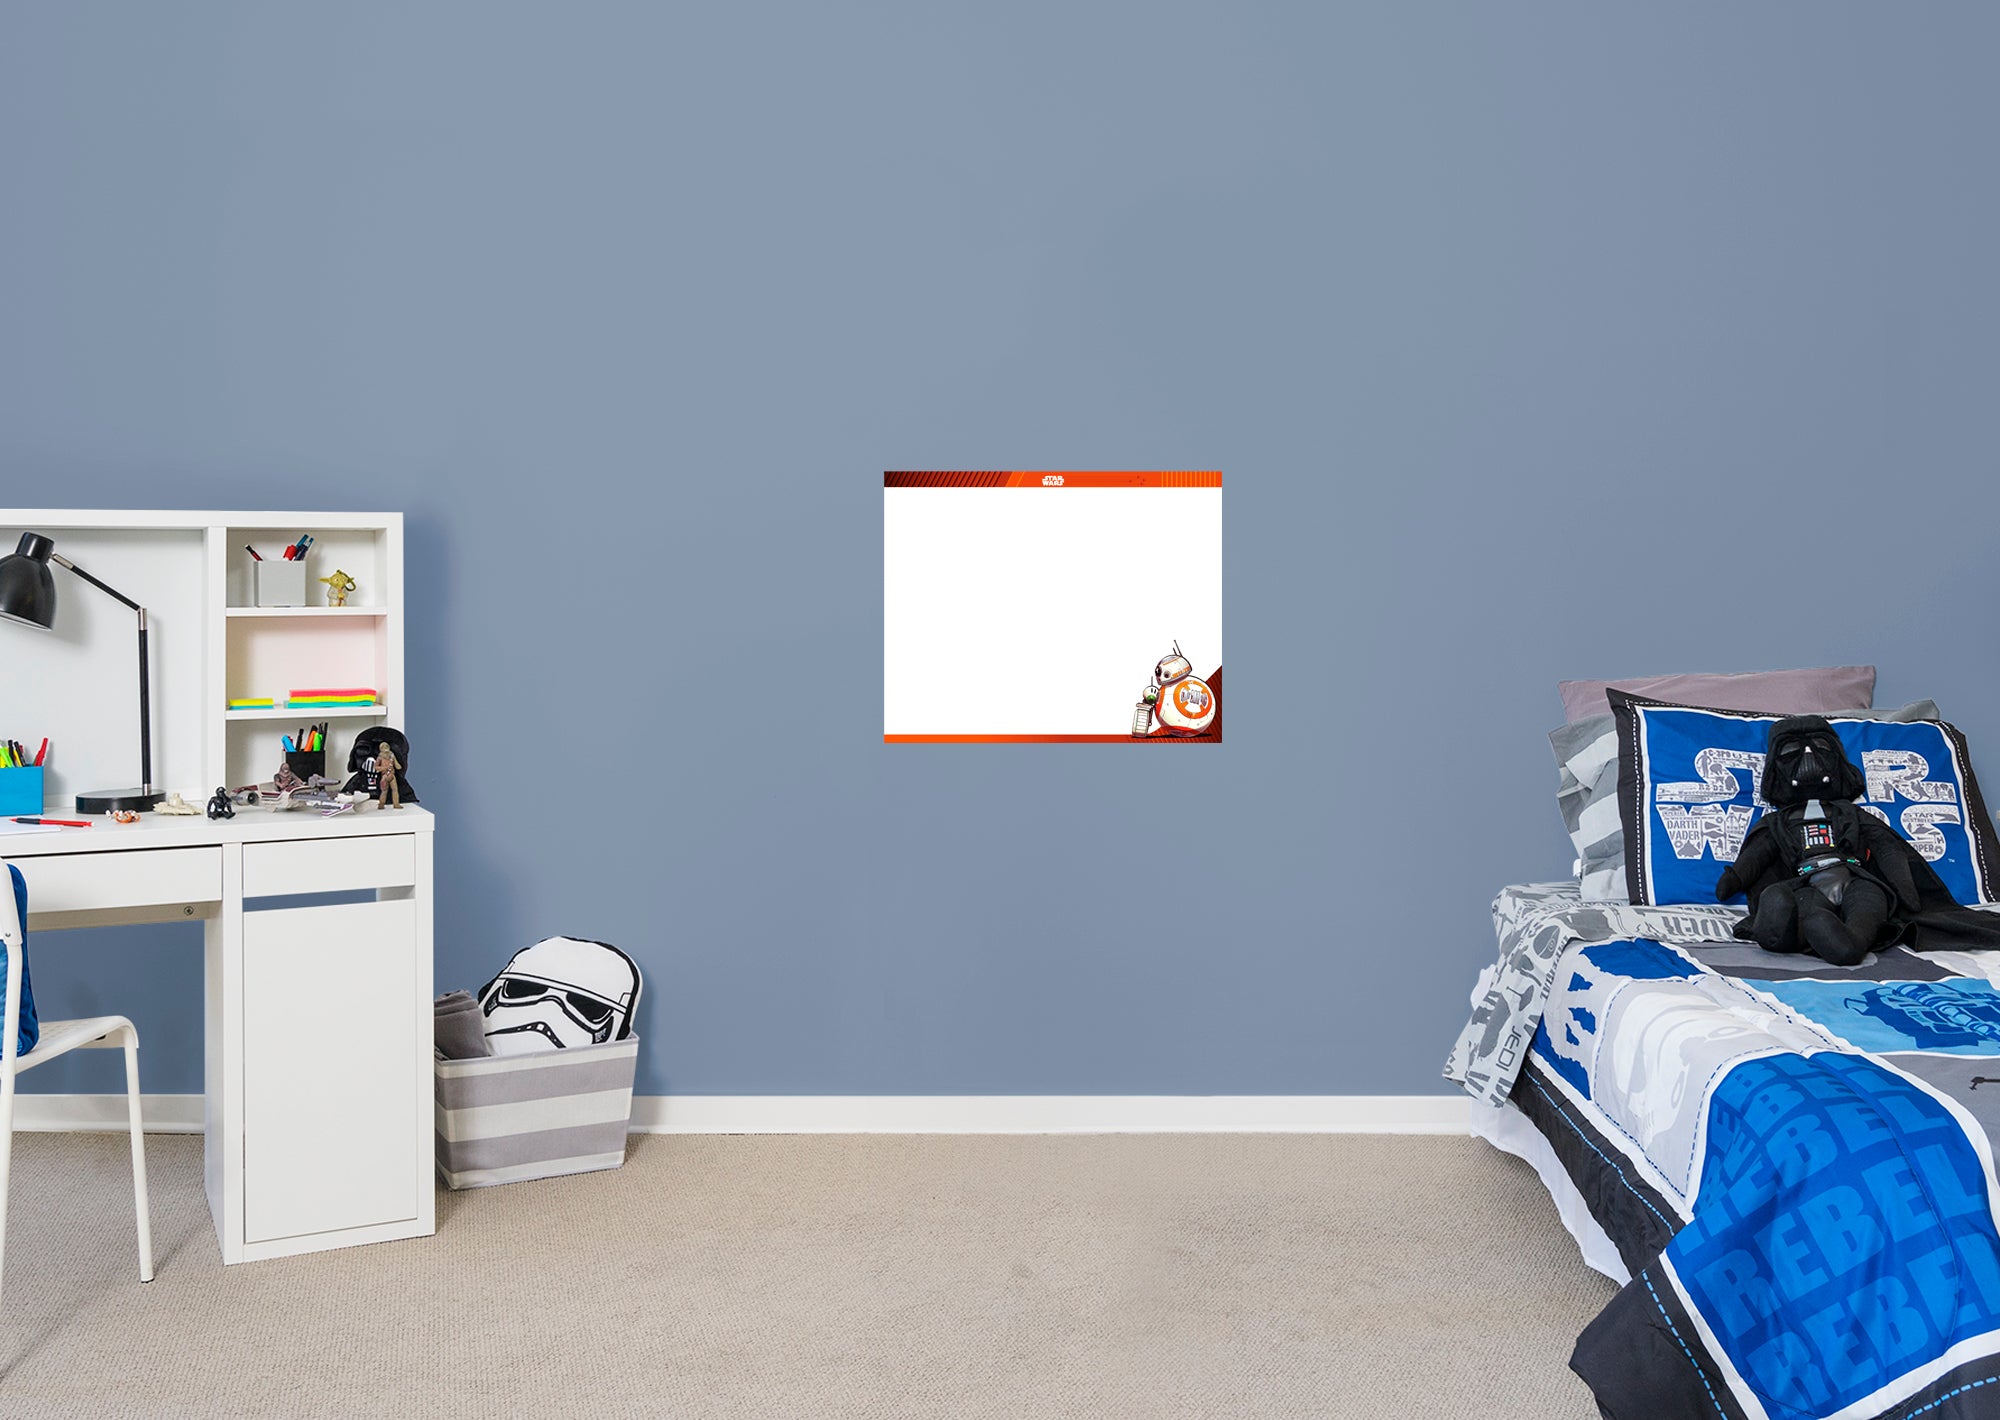 BB8 Whiteboard - Officially Licensed Star Wars Removable Wall Decal XL by Fathead | Vinyl